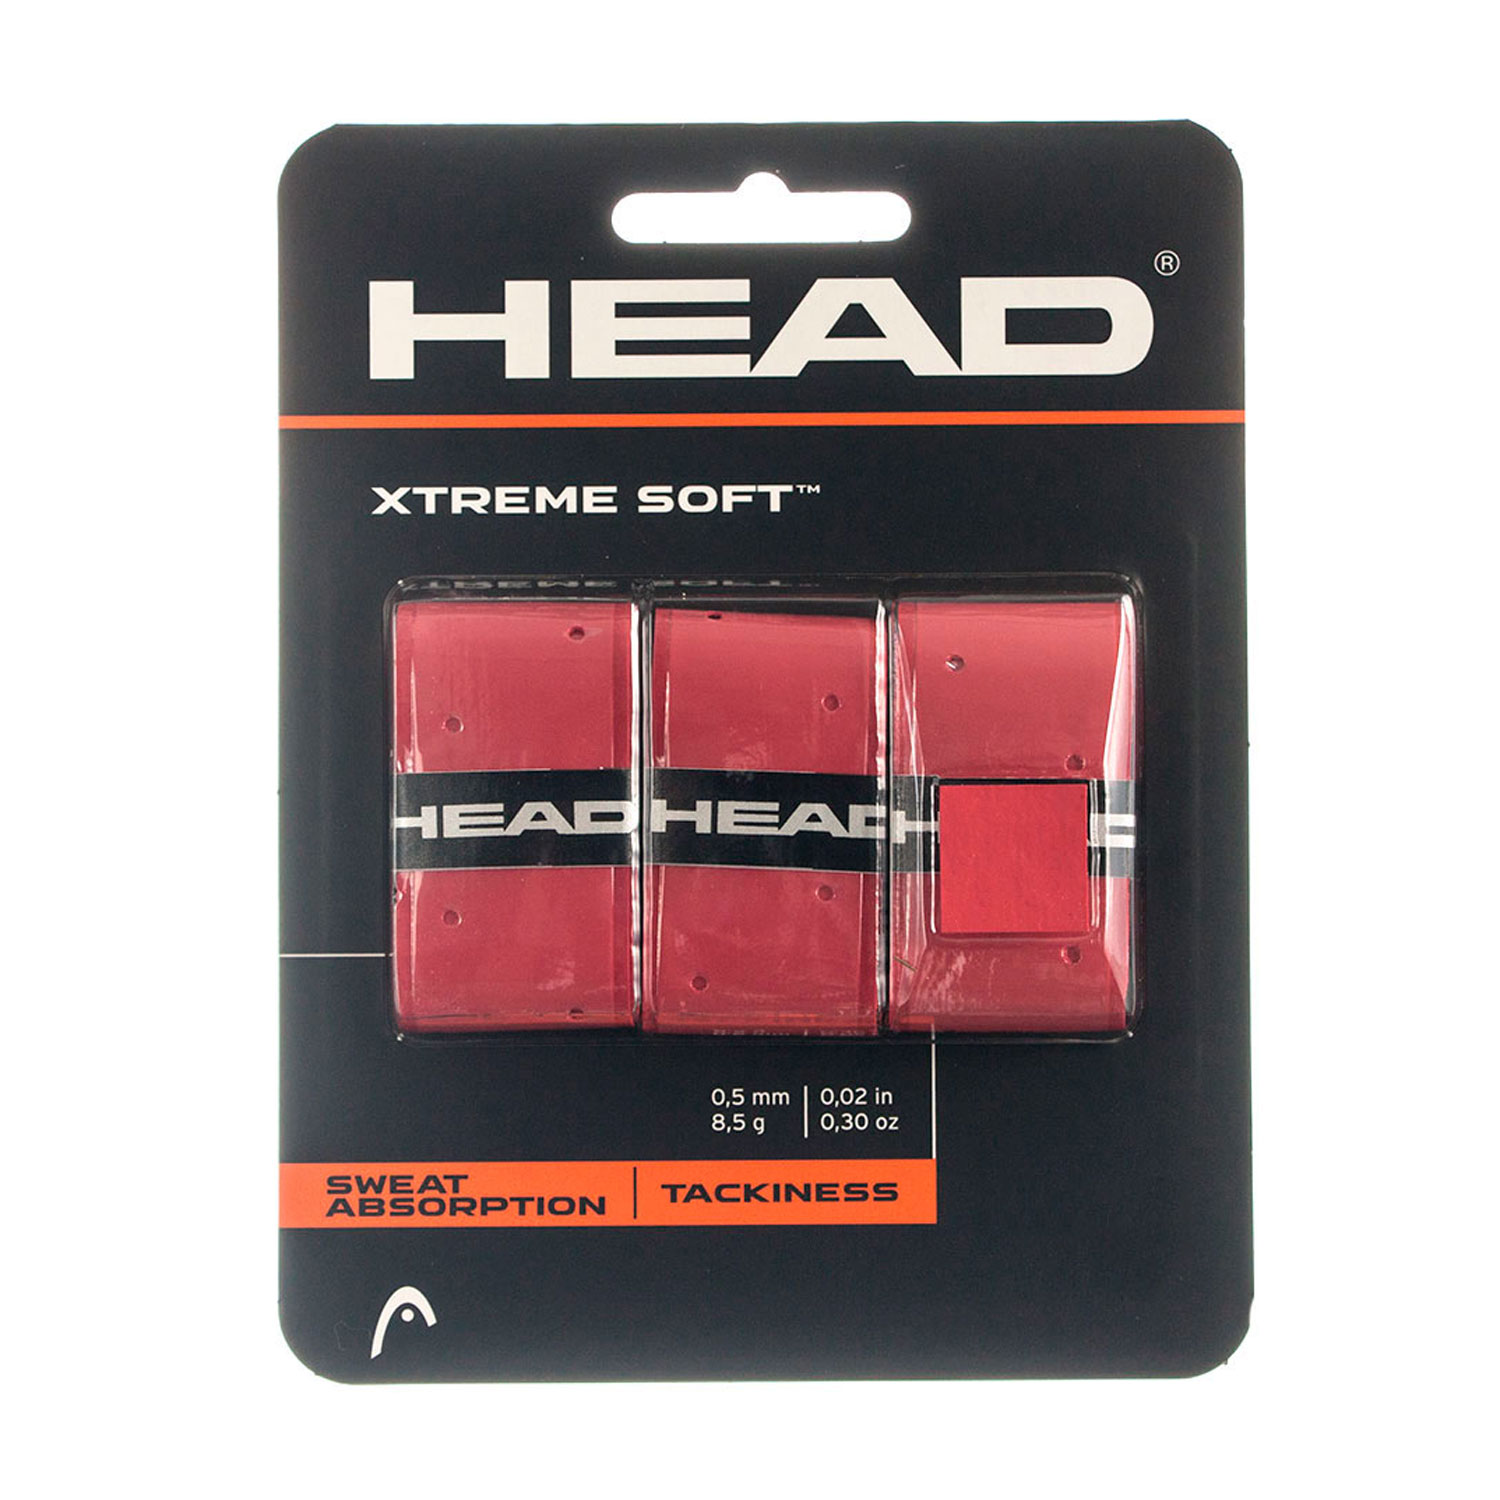 Head Xtreme Soft Overgrip x 3 - Red